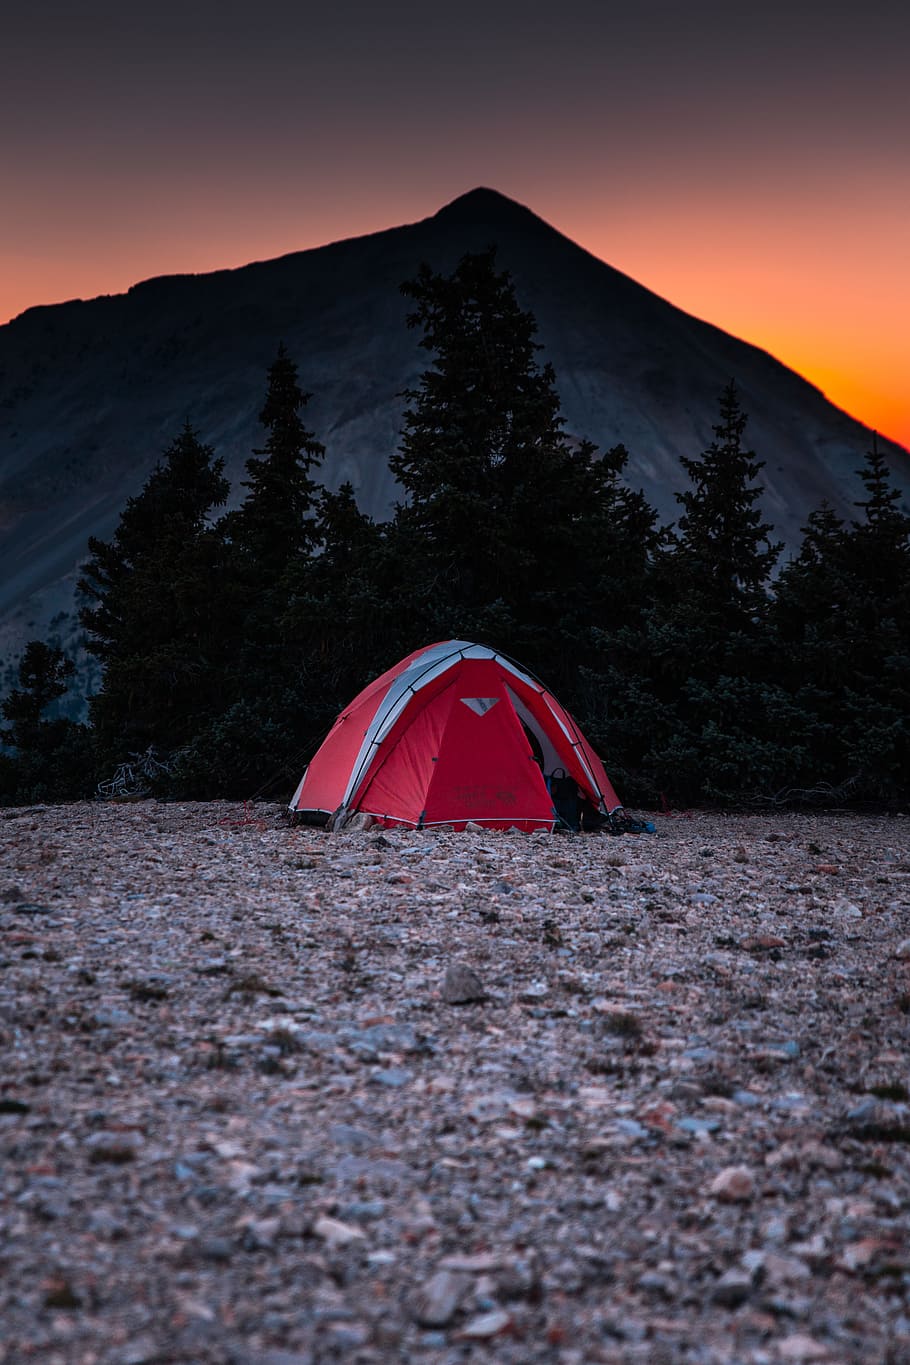 red and gray done tent near tree, forest, mountain hardwear, sunset, HD wallpaper